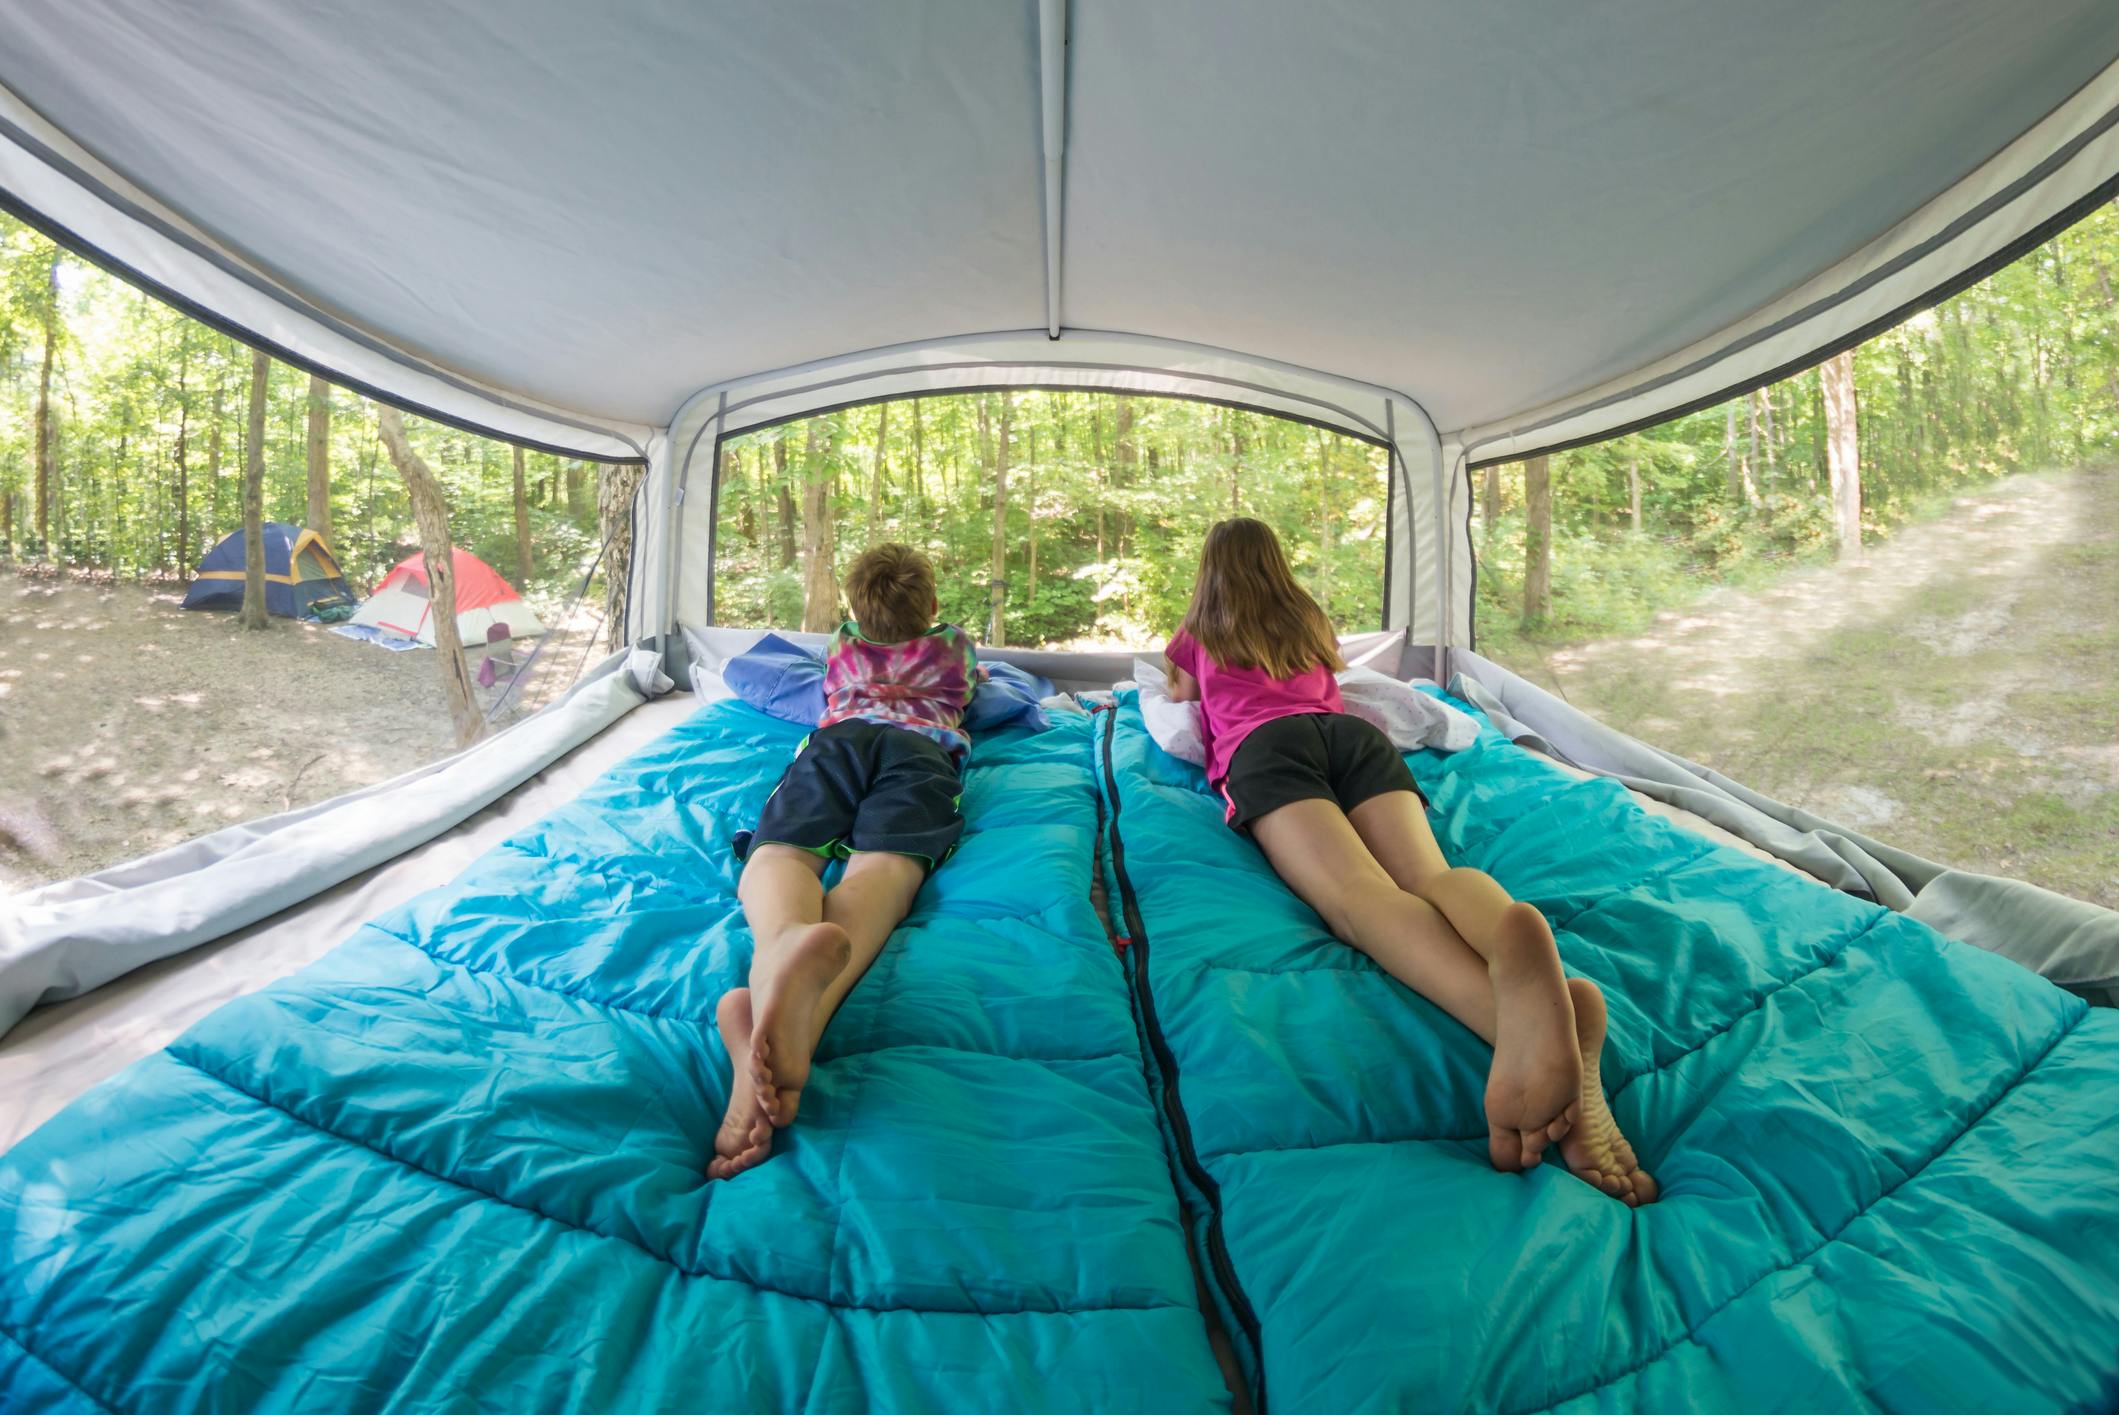 Bare footed children laying on blue sleeping bags in pop-up camper bunk end bed looking out window at surrounding forest trees and campground.